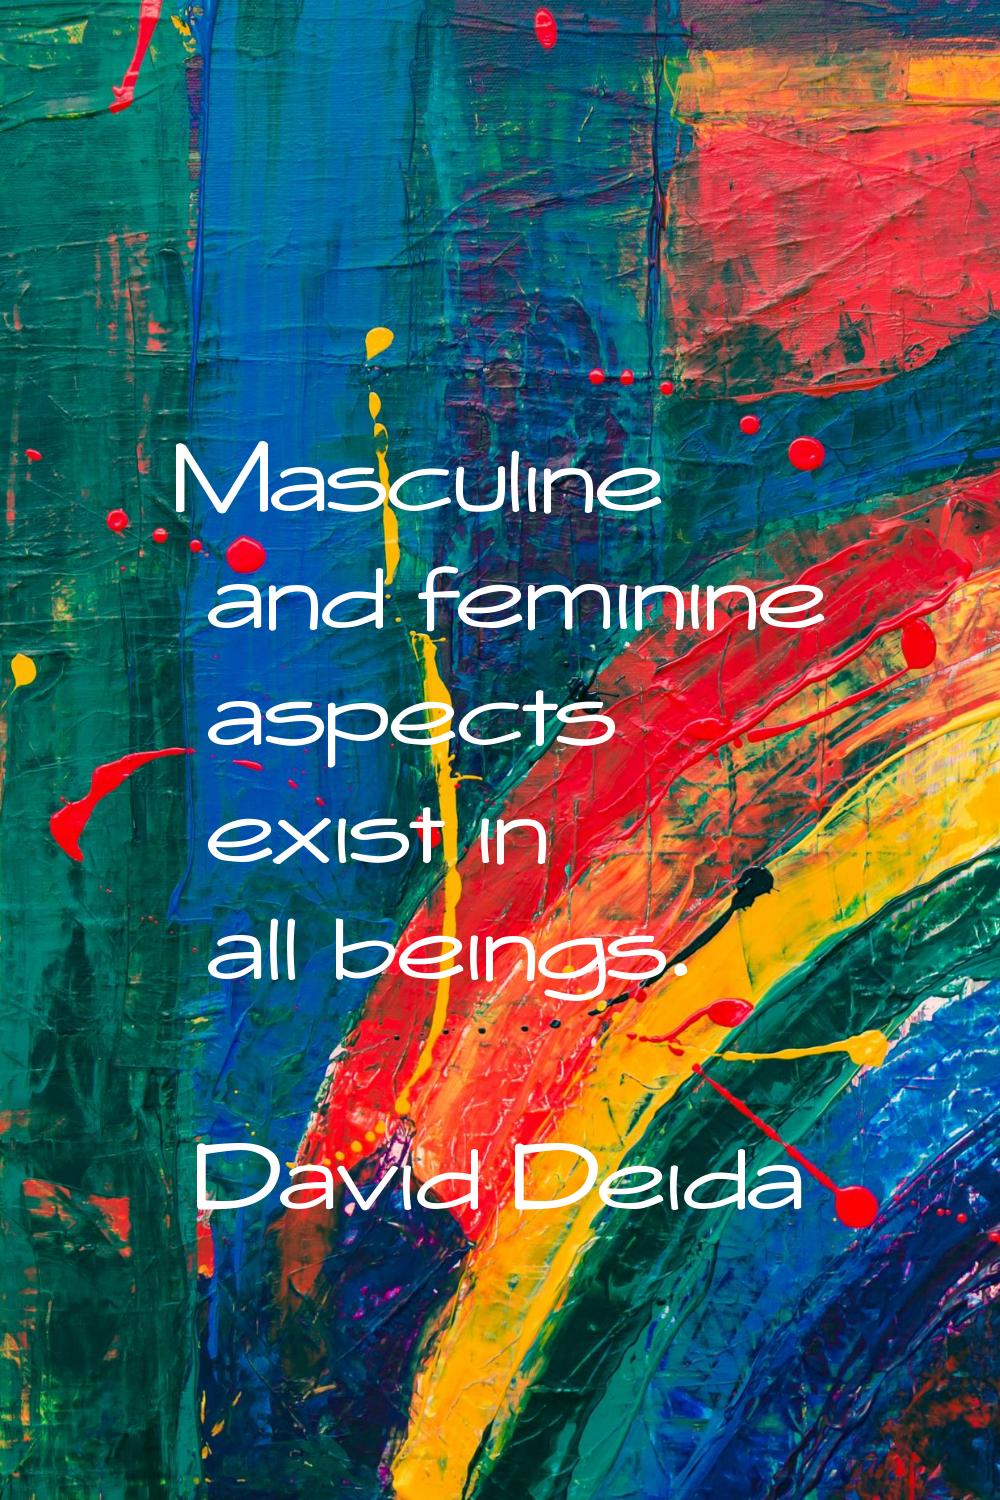 Masculine and feminine aspects exist in all beings.